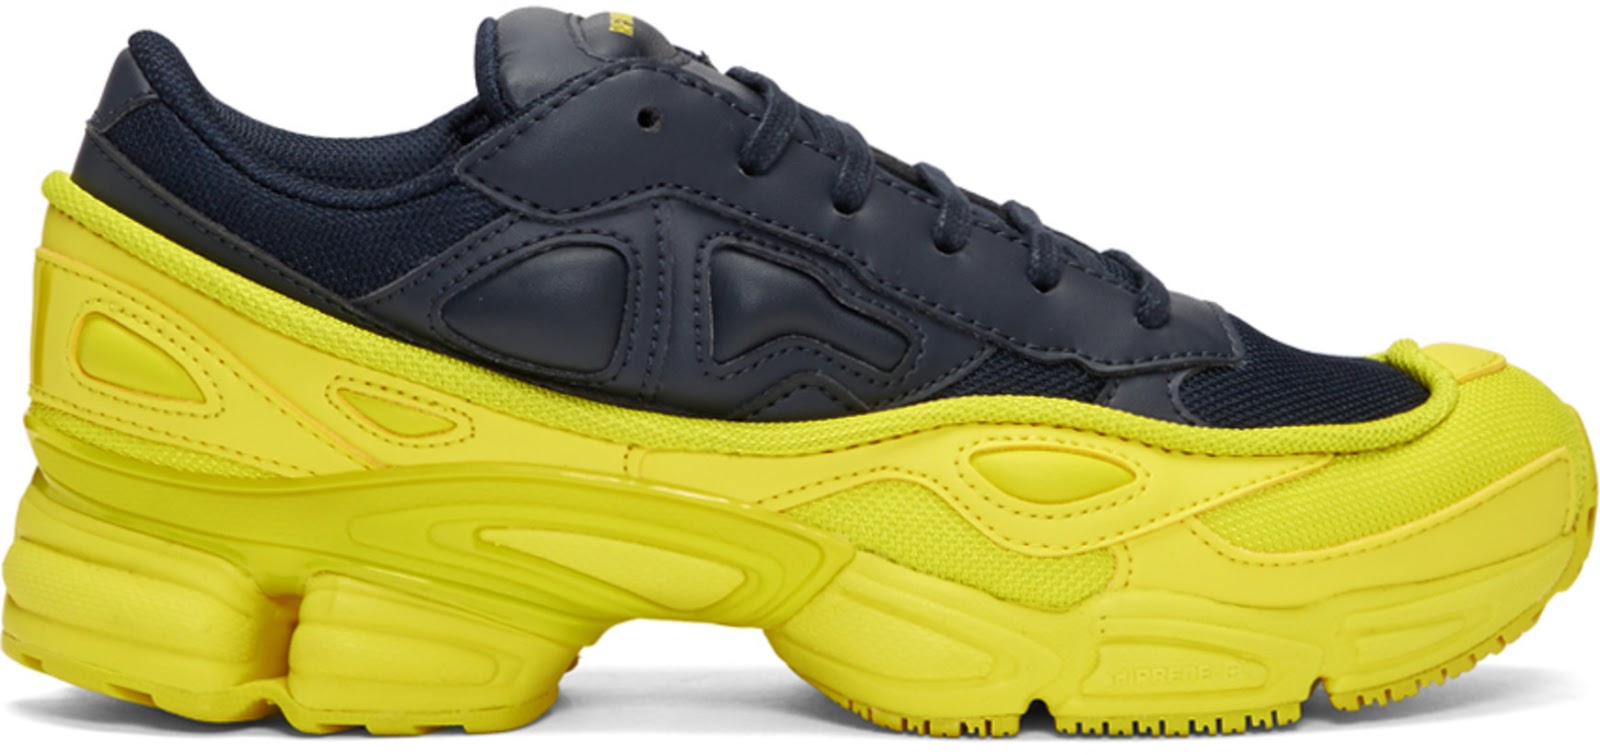 Chunked Out In Color: Raf Simons Adidas Originals Edition Ozweego ...